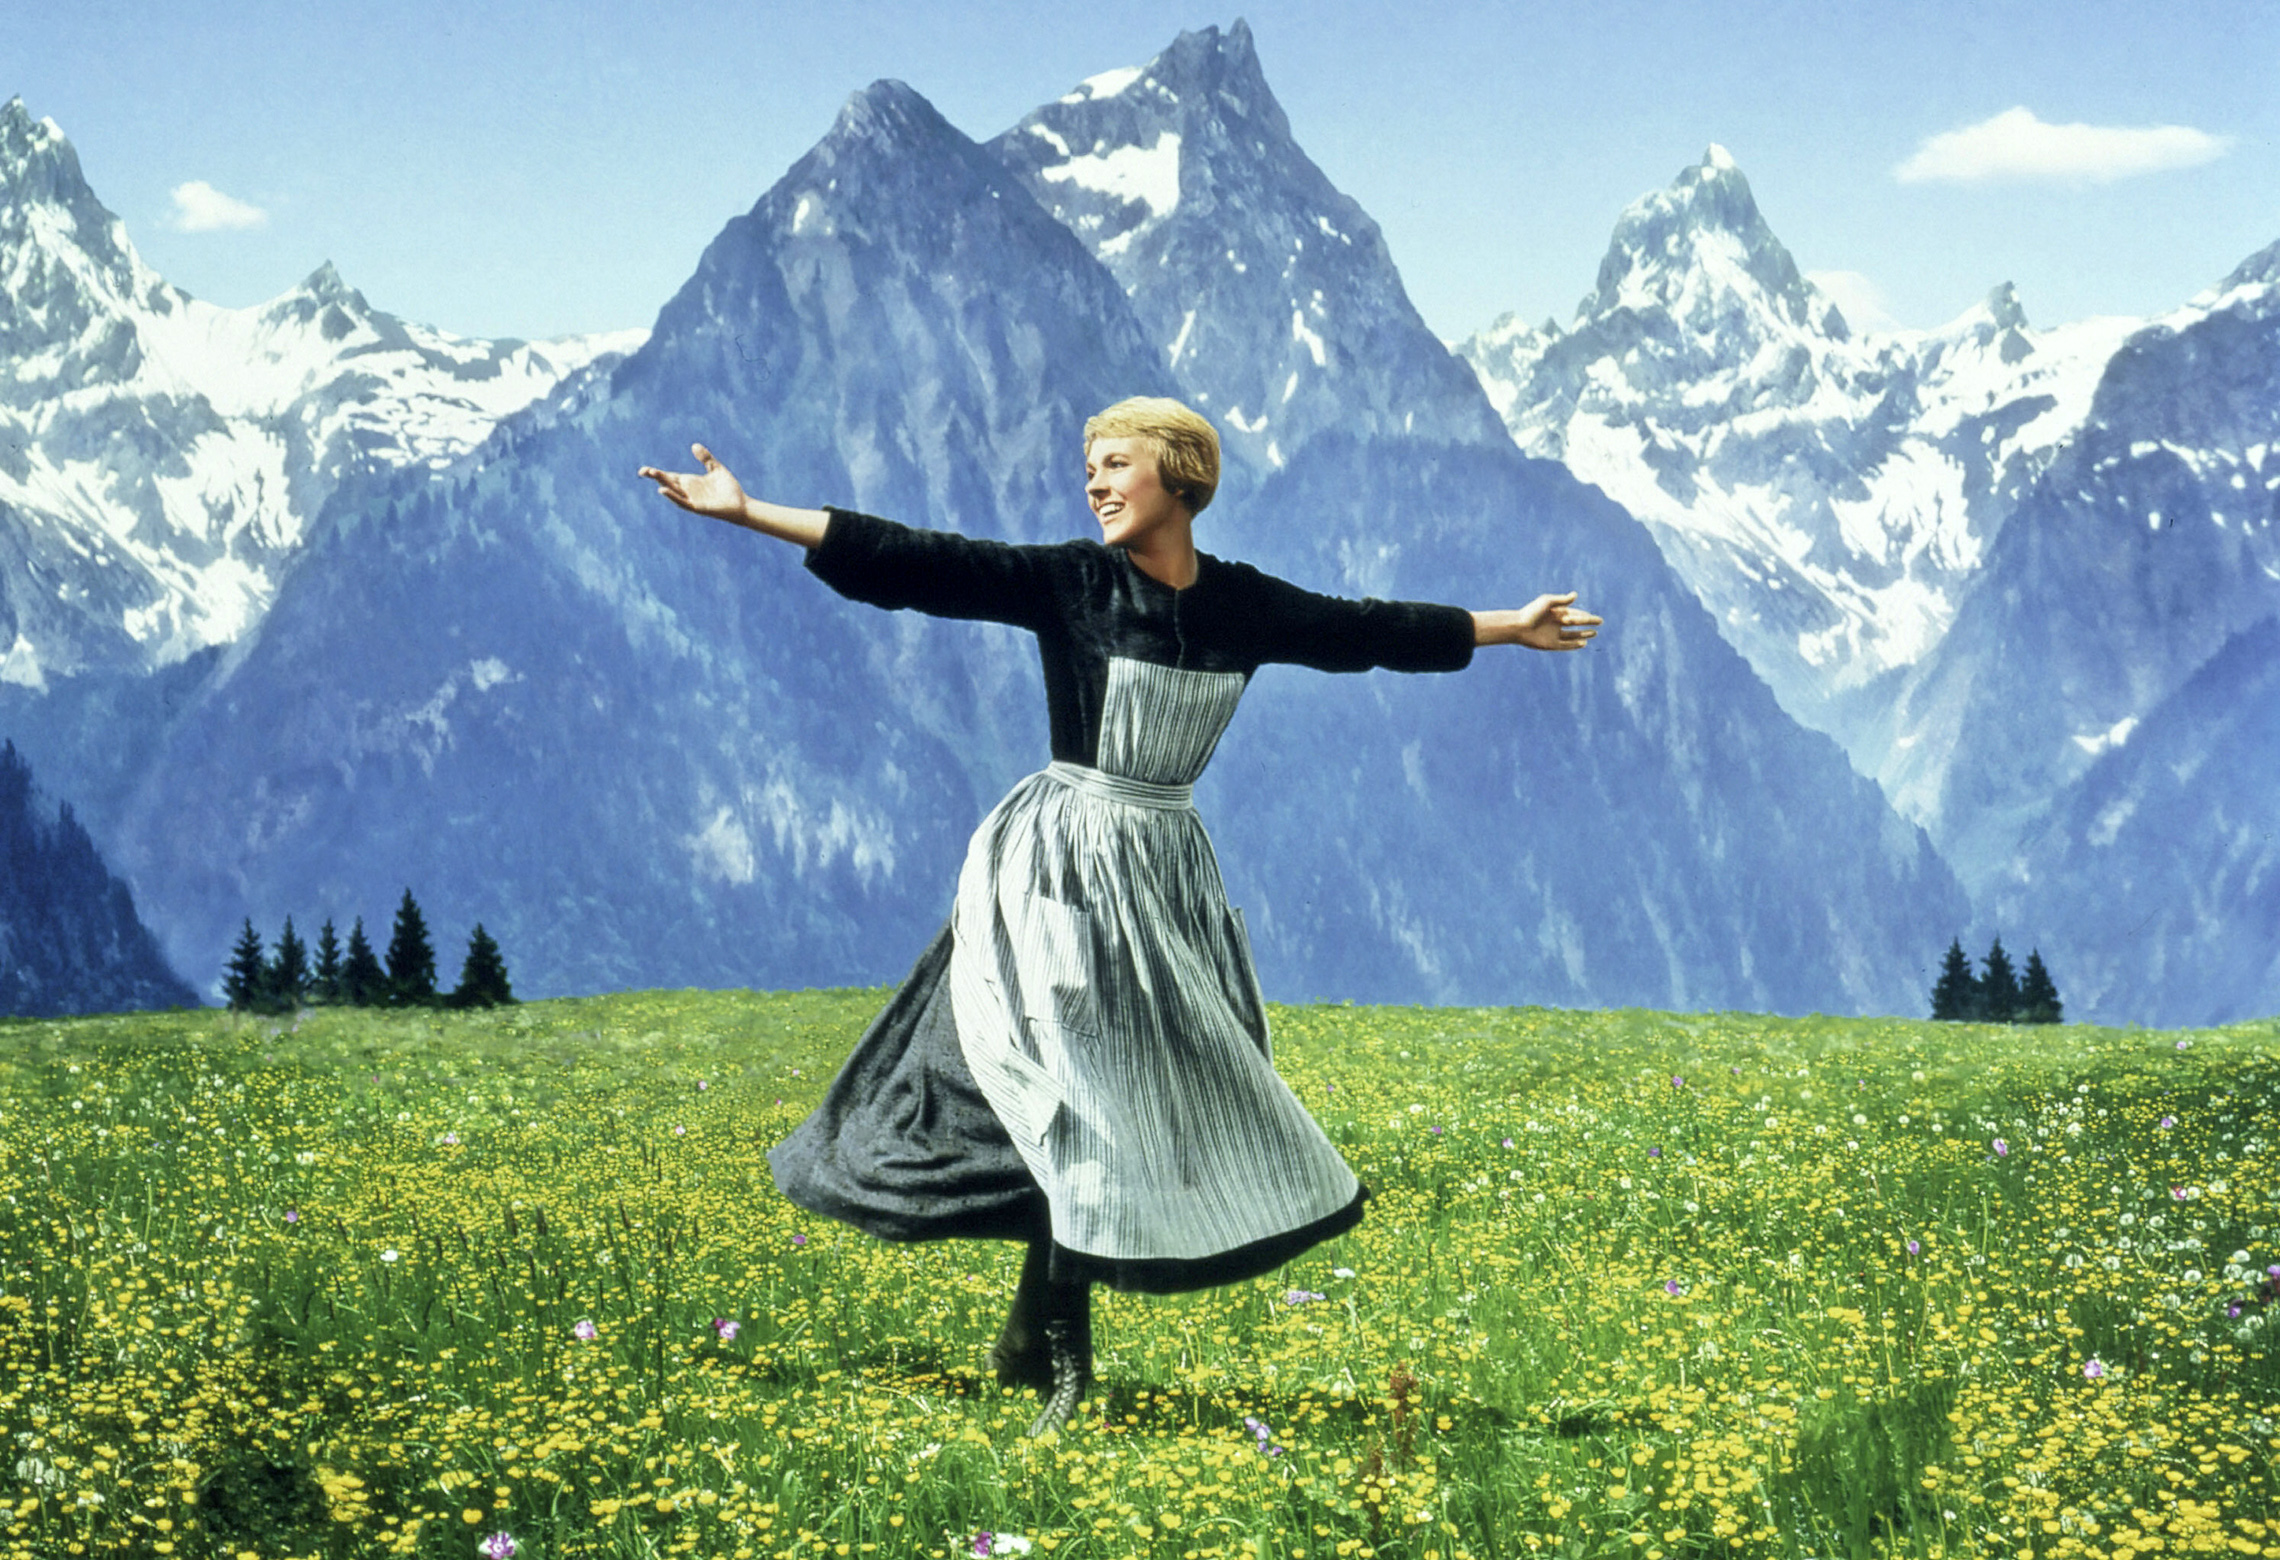 Dame Julie Andrews Academy Of Achievement This inspirational lyric from broadway musical the sound of music is a reminder straight from rodgers and hammerstein. dame julie andrews academy of achievement